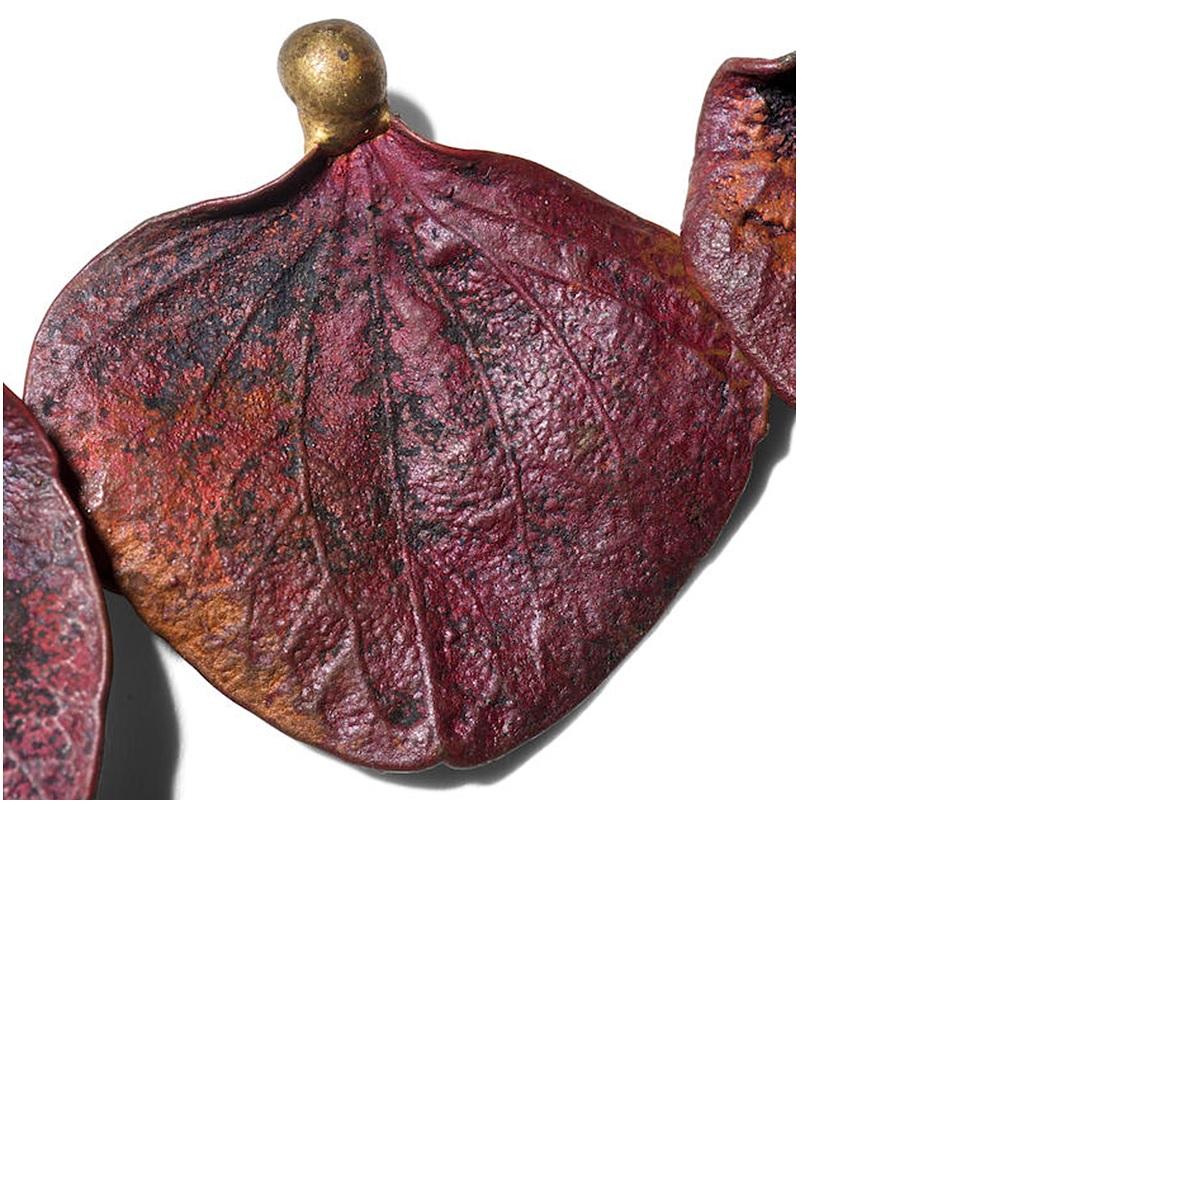 A rare French cast bronze necklace with red-brown patina by Claude Lalanne. The necklace comprises of individual leaves with exquisite detailing, each being a variant from one to another. The coloring, and in some cases the discoloring, almost